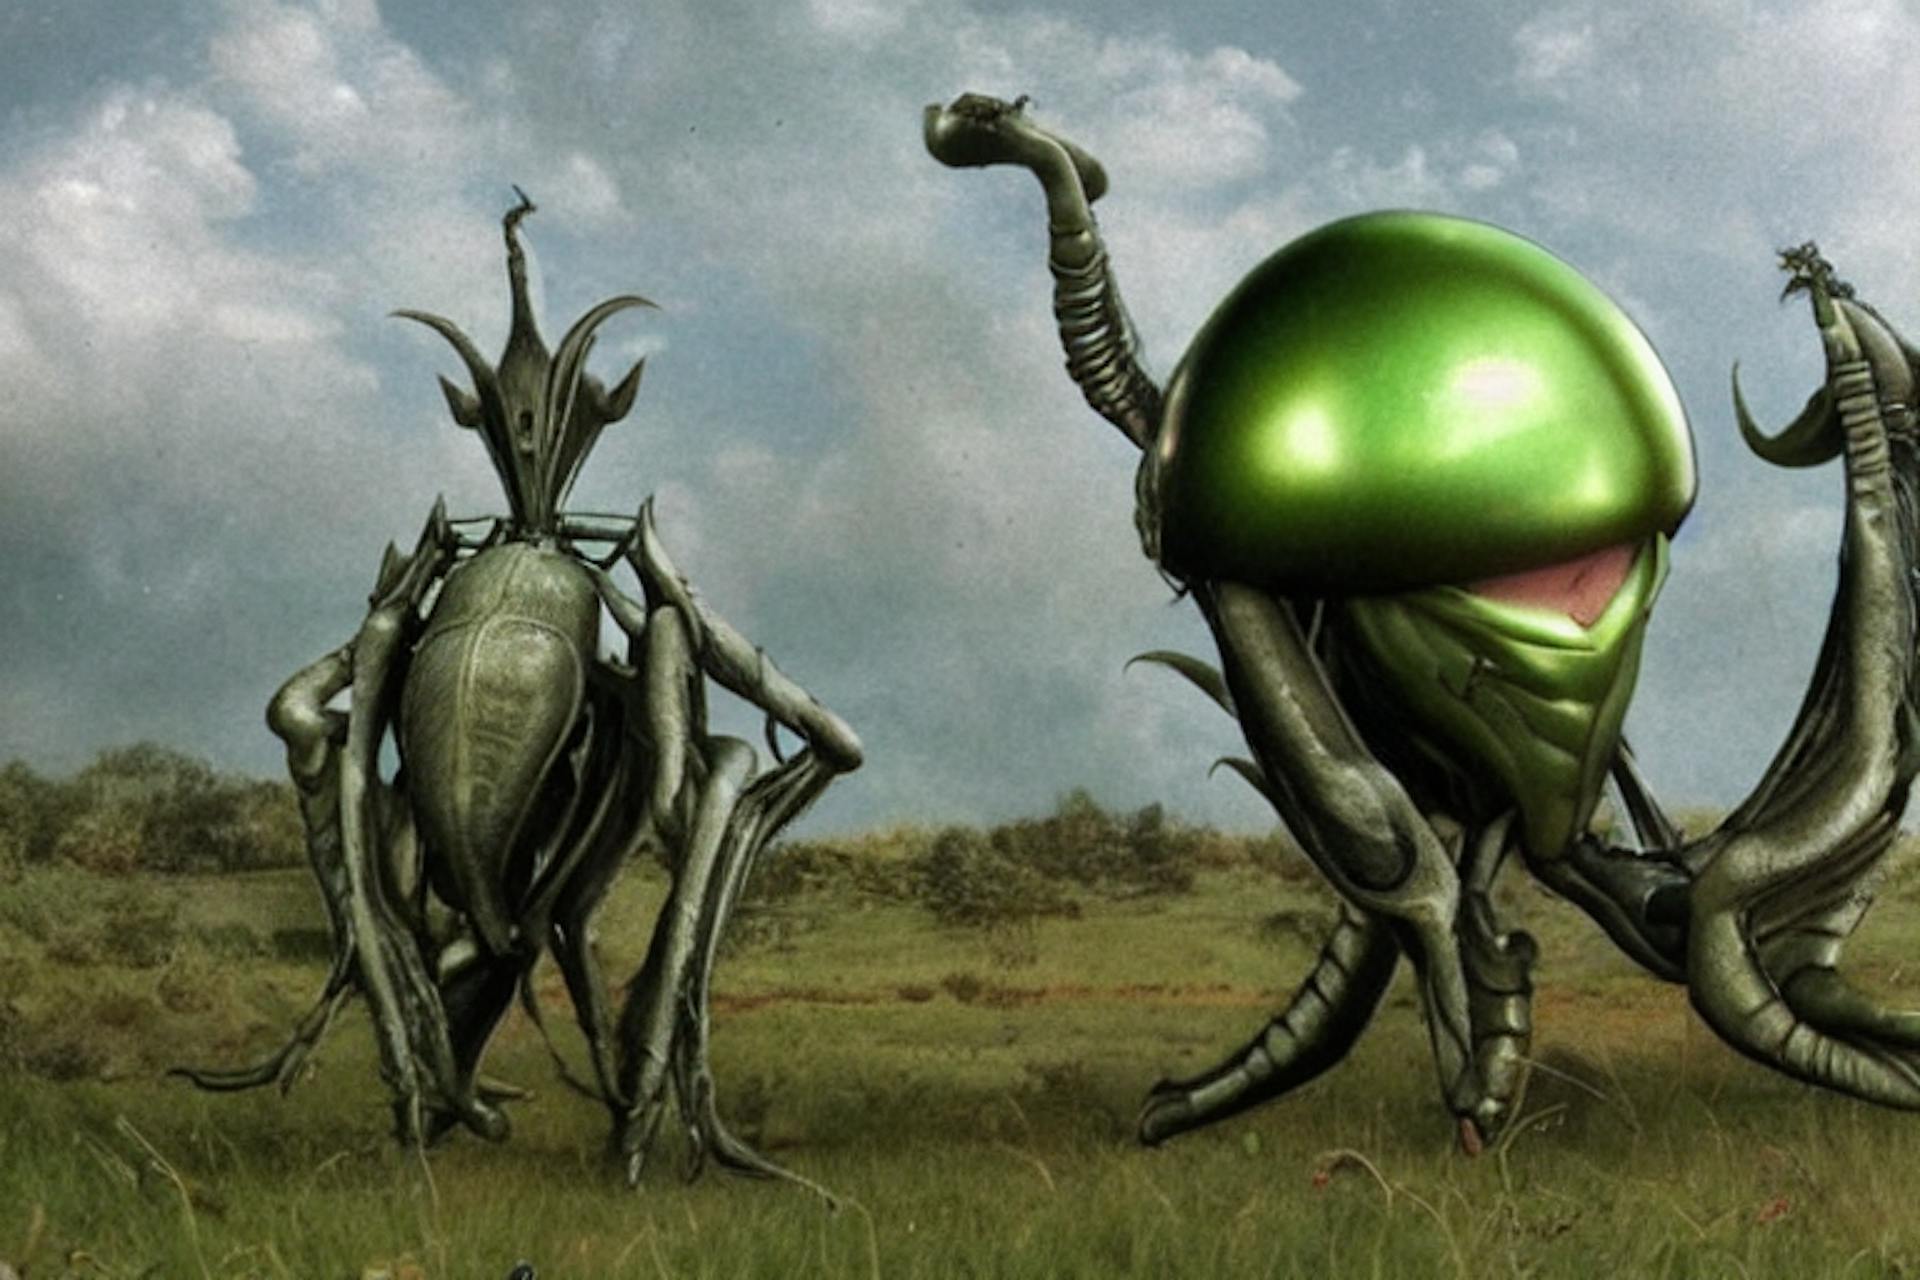 "giant insectoid aliens"